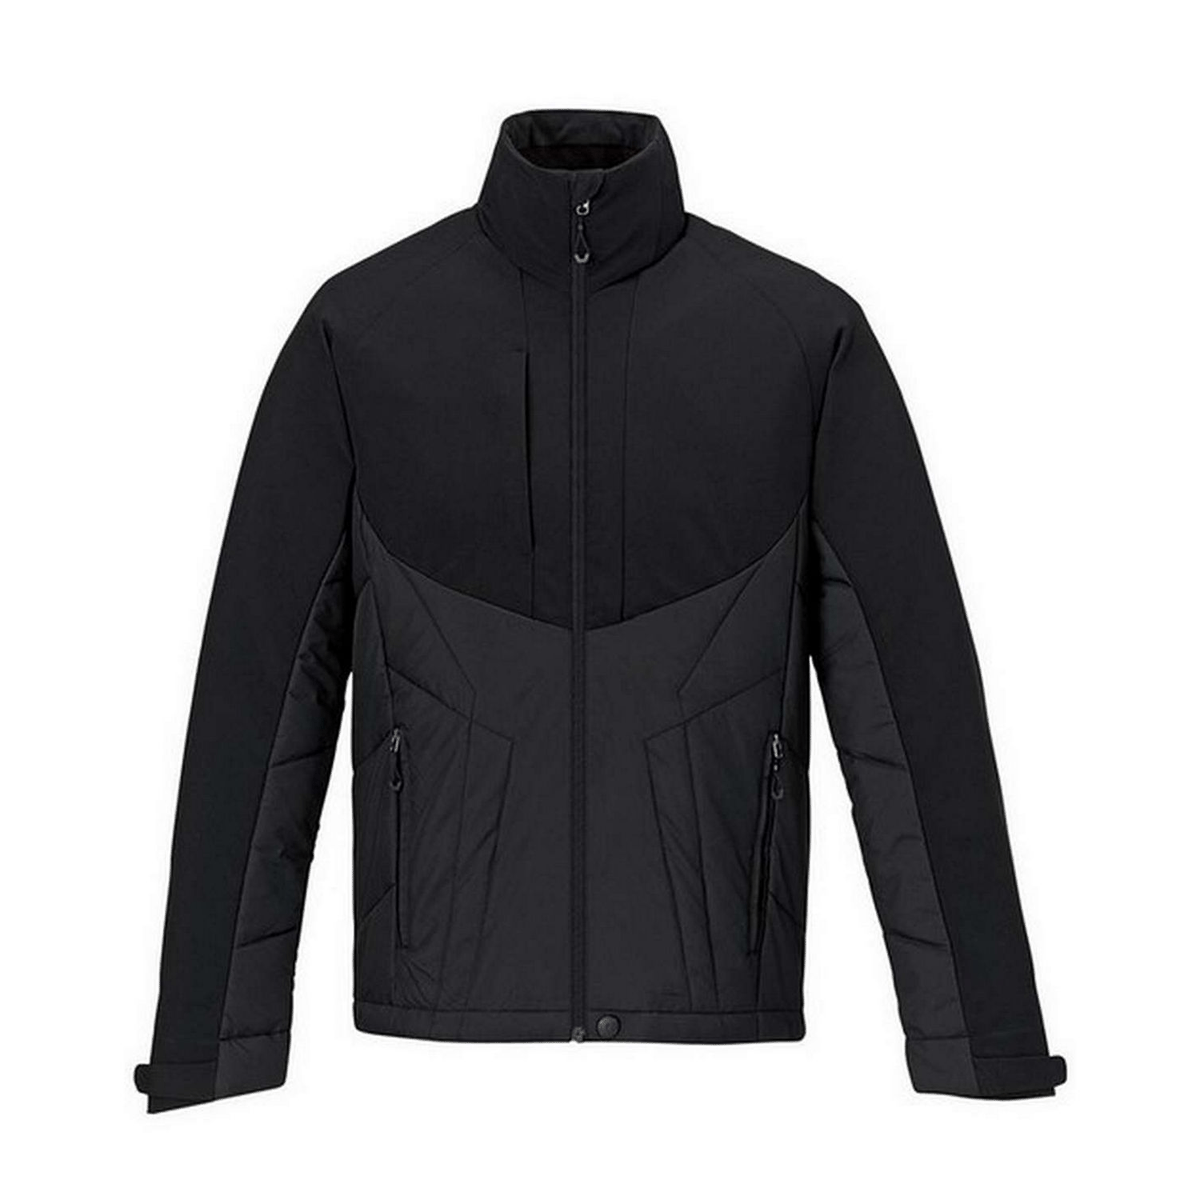 NORTH END MEN'S INNOVATE INSULATED HYBRID SOFT SHELL JACKET